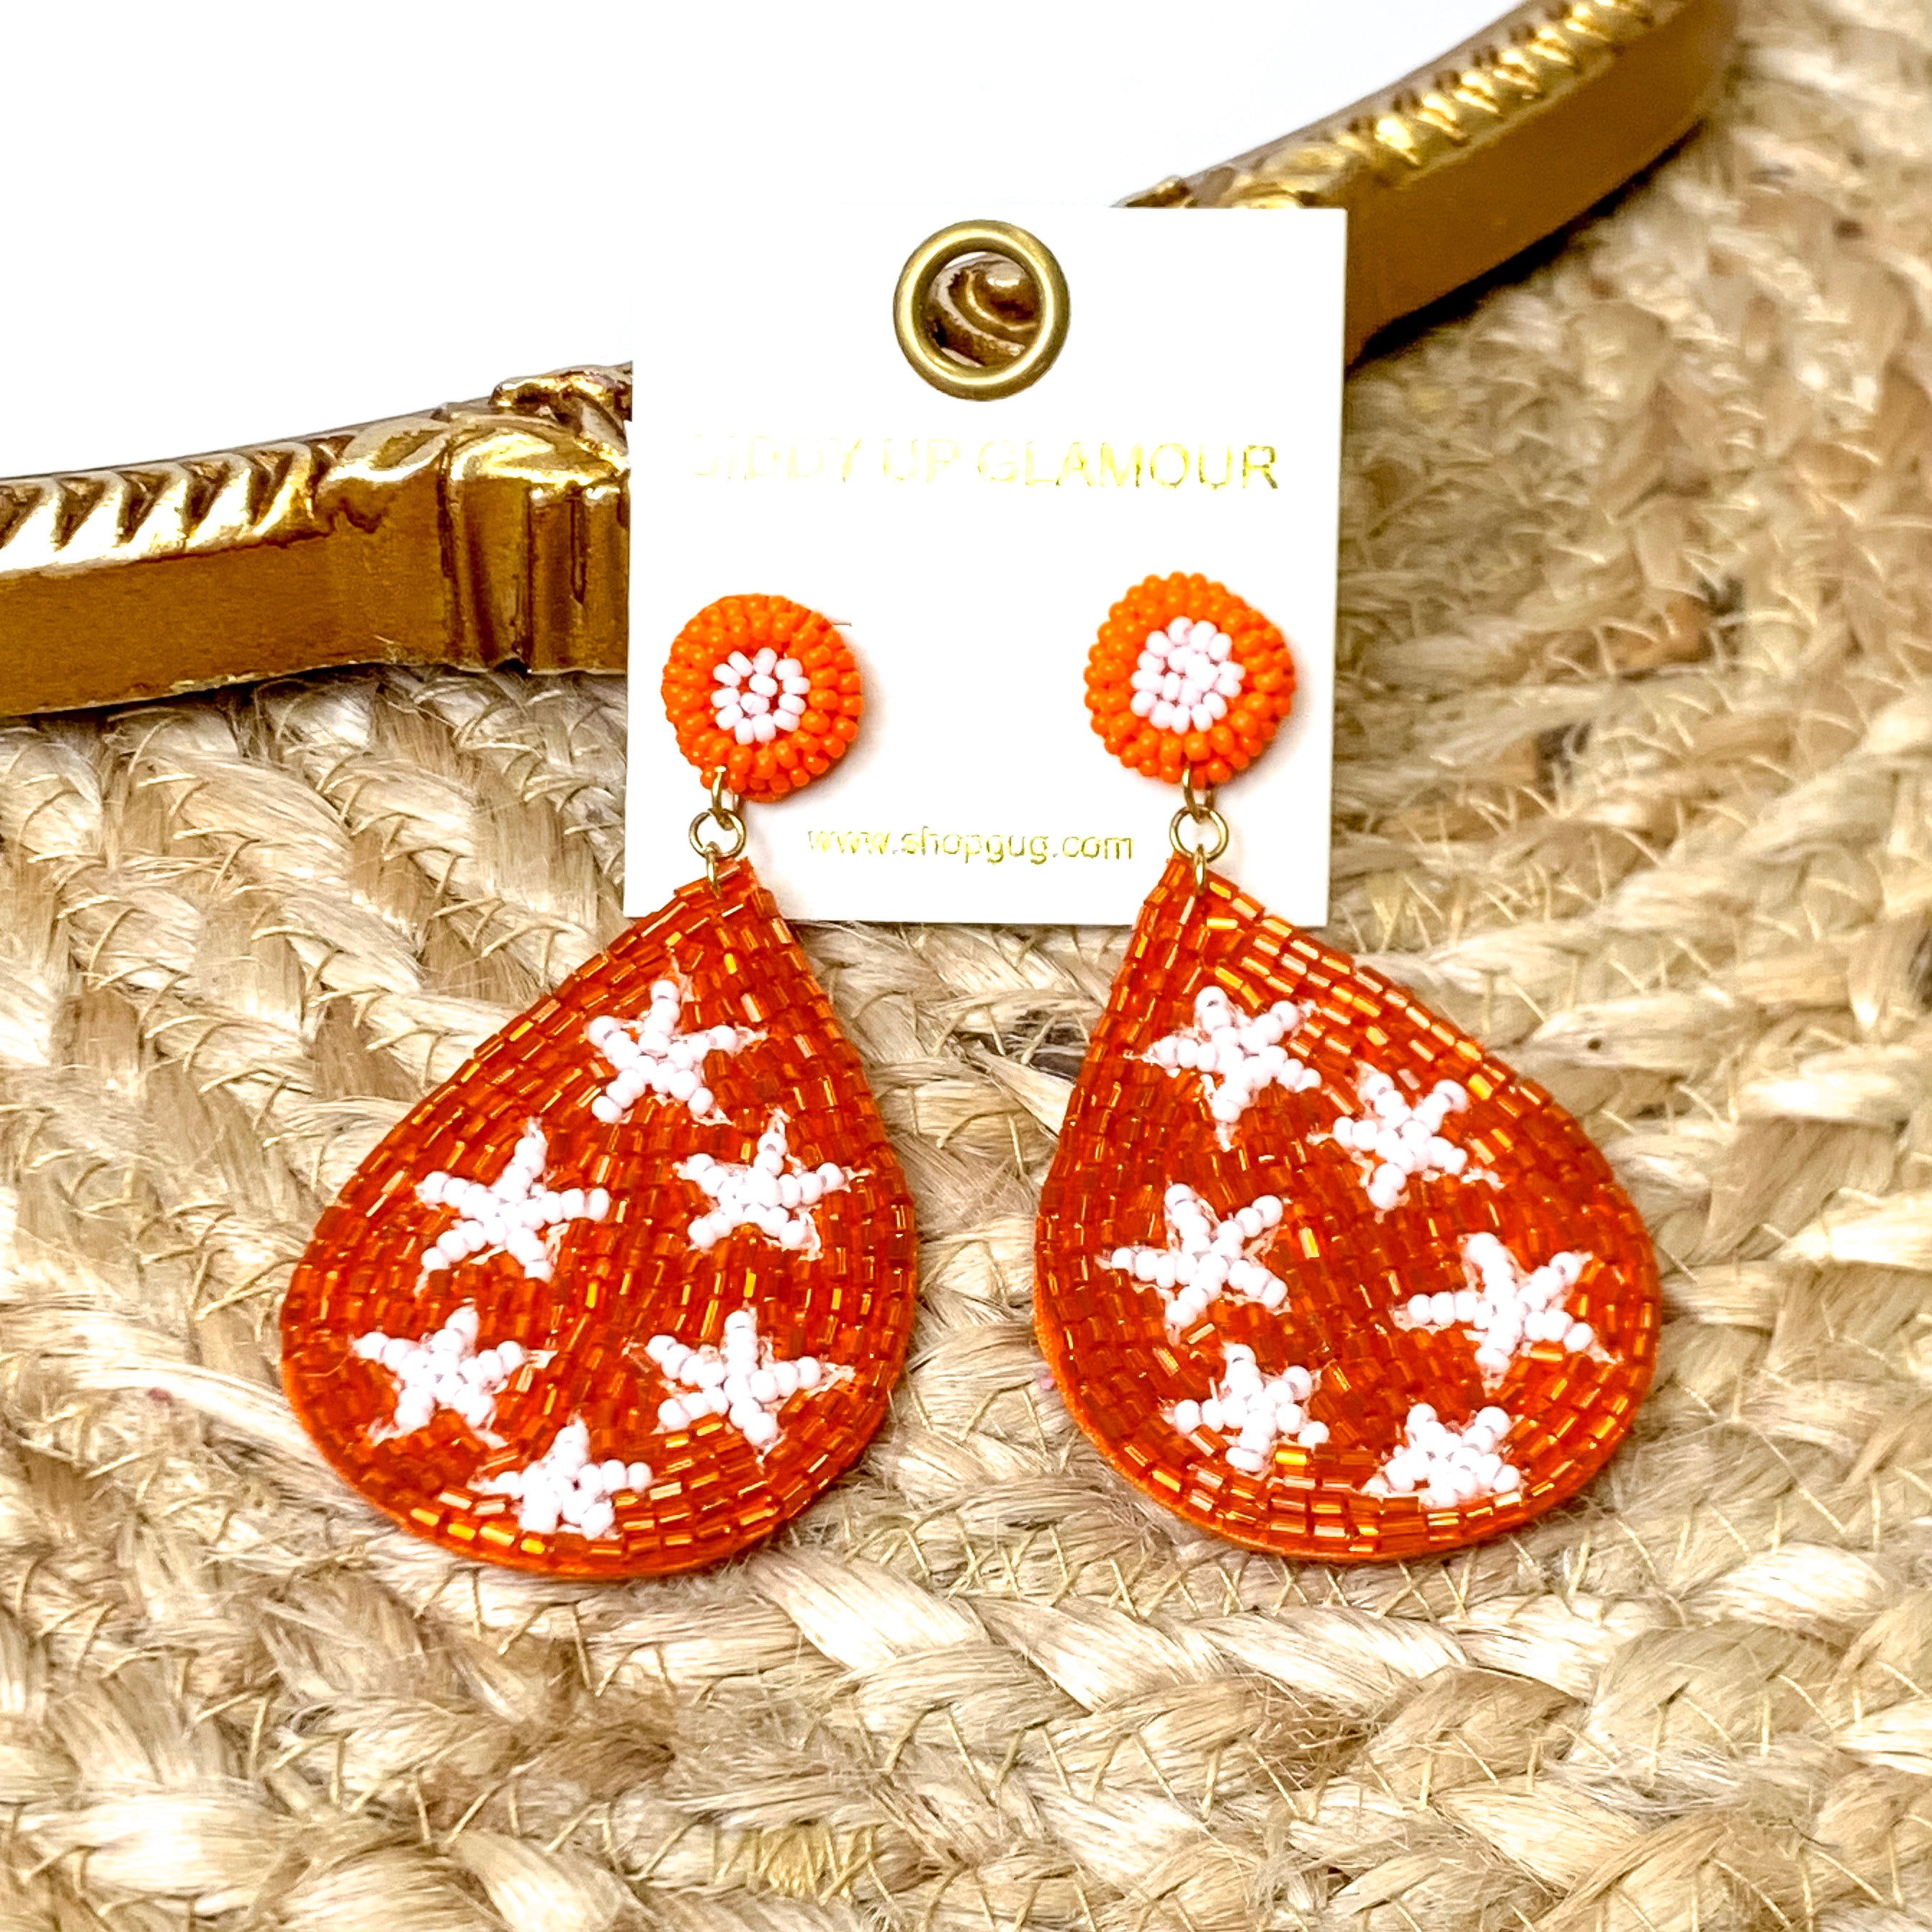 Beaded Teardrop Dangle Earrings with Stars in Orange and White - Giddy Up Glamour Boutique